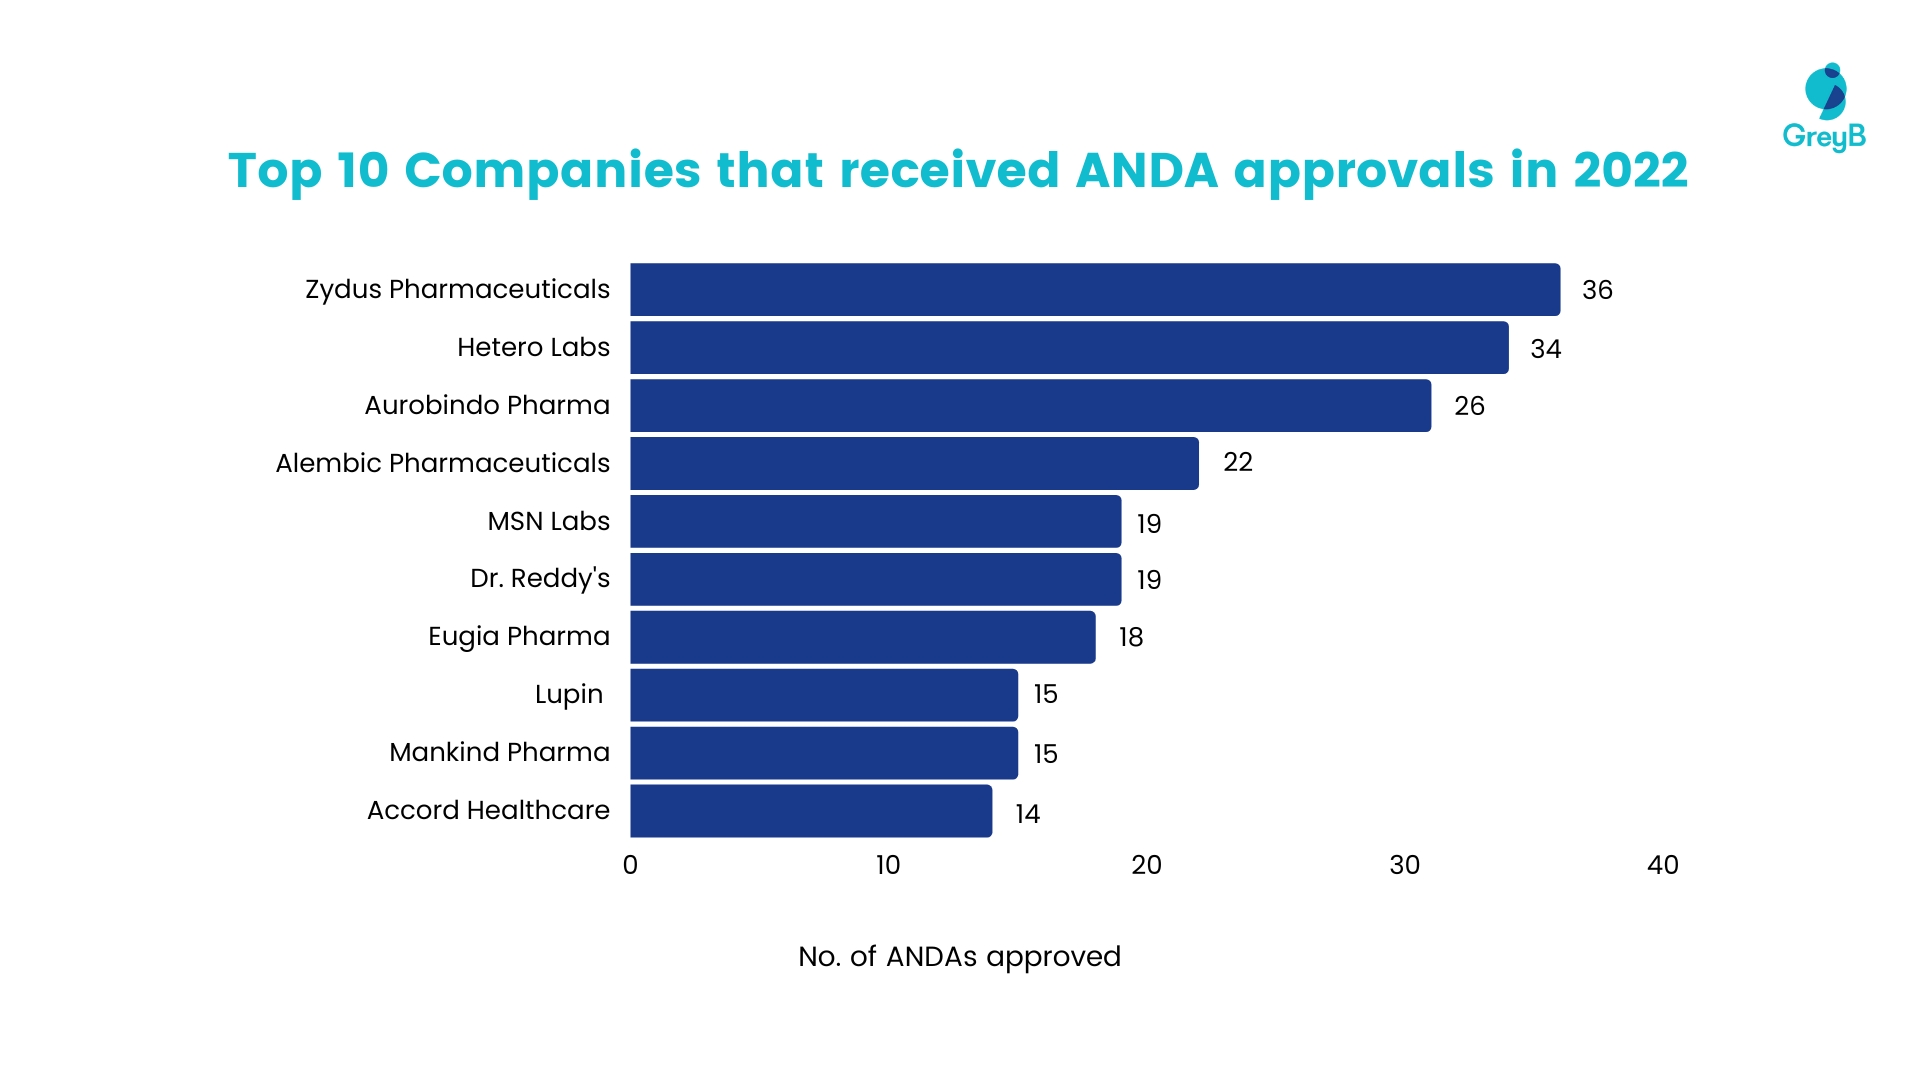 Top 10 companies that received ANDA approvals in 2022
